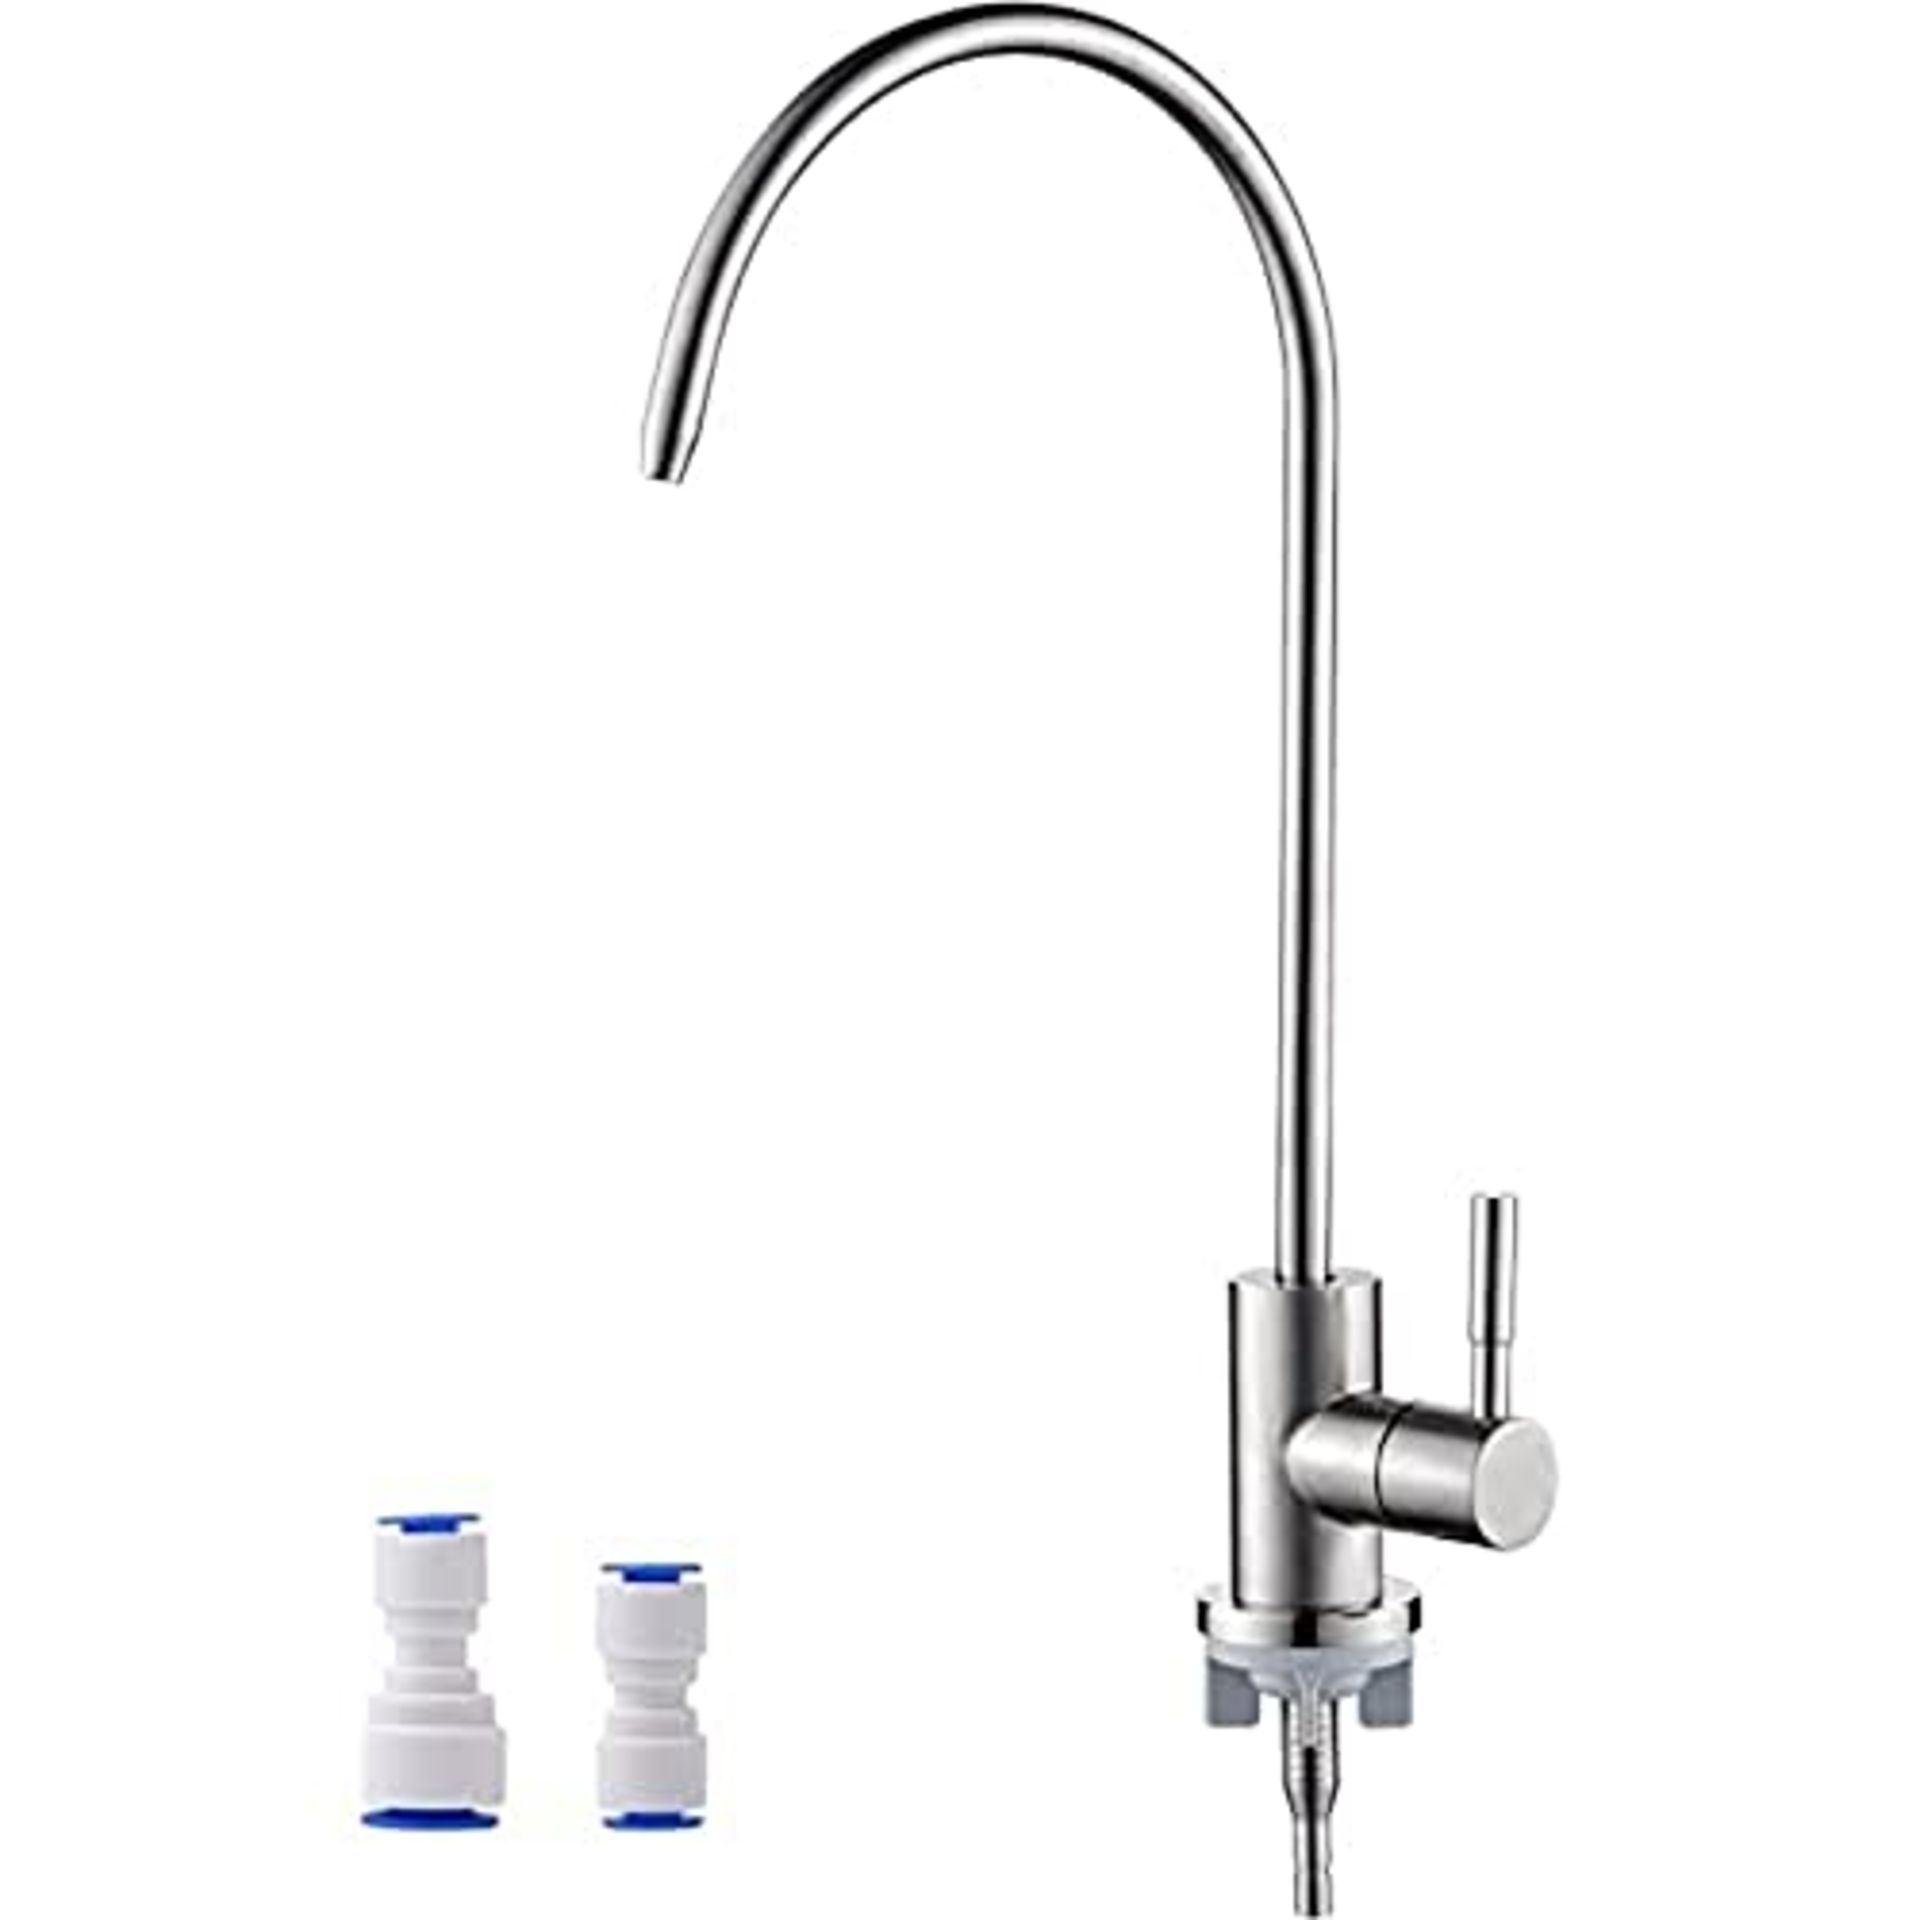 Ibergrif M22301A Drinking Water Filter Kitchen Tap,304 Stainless Steel Modern Single L